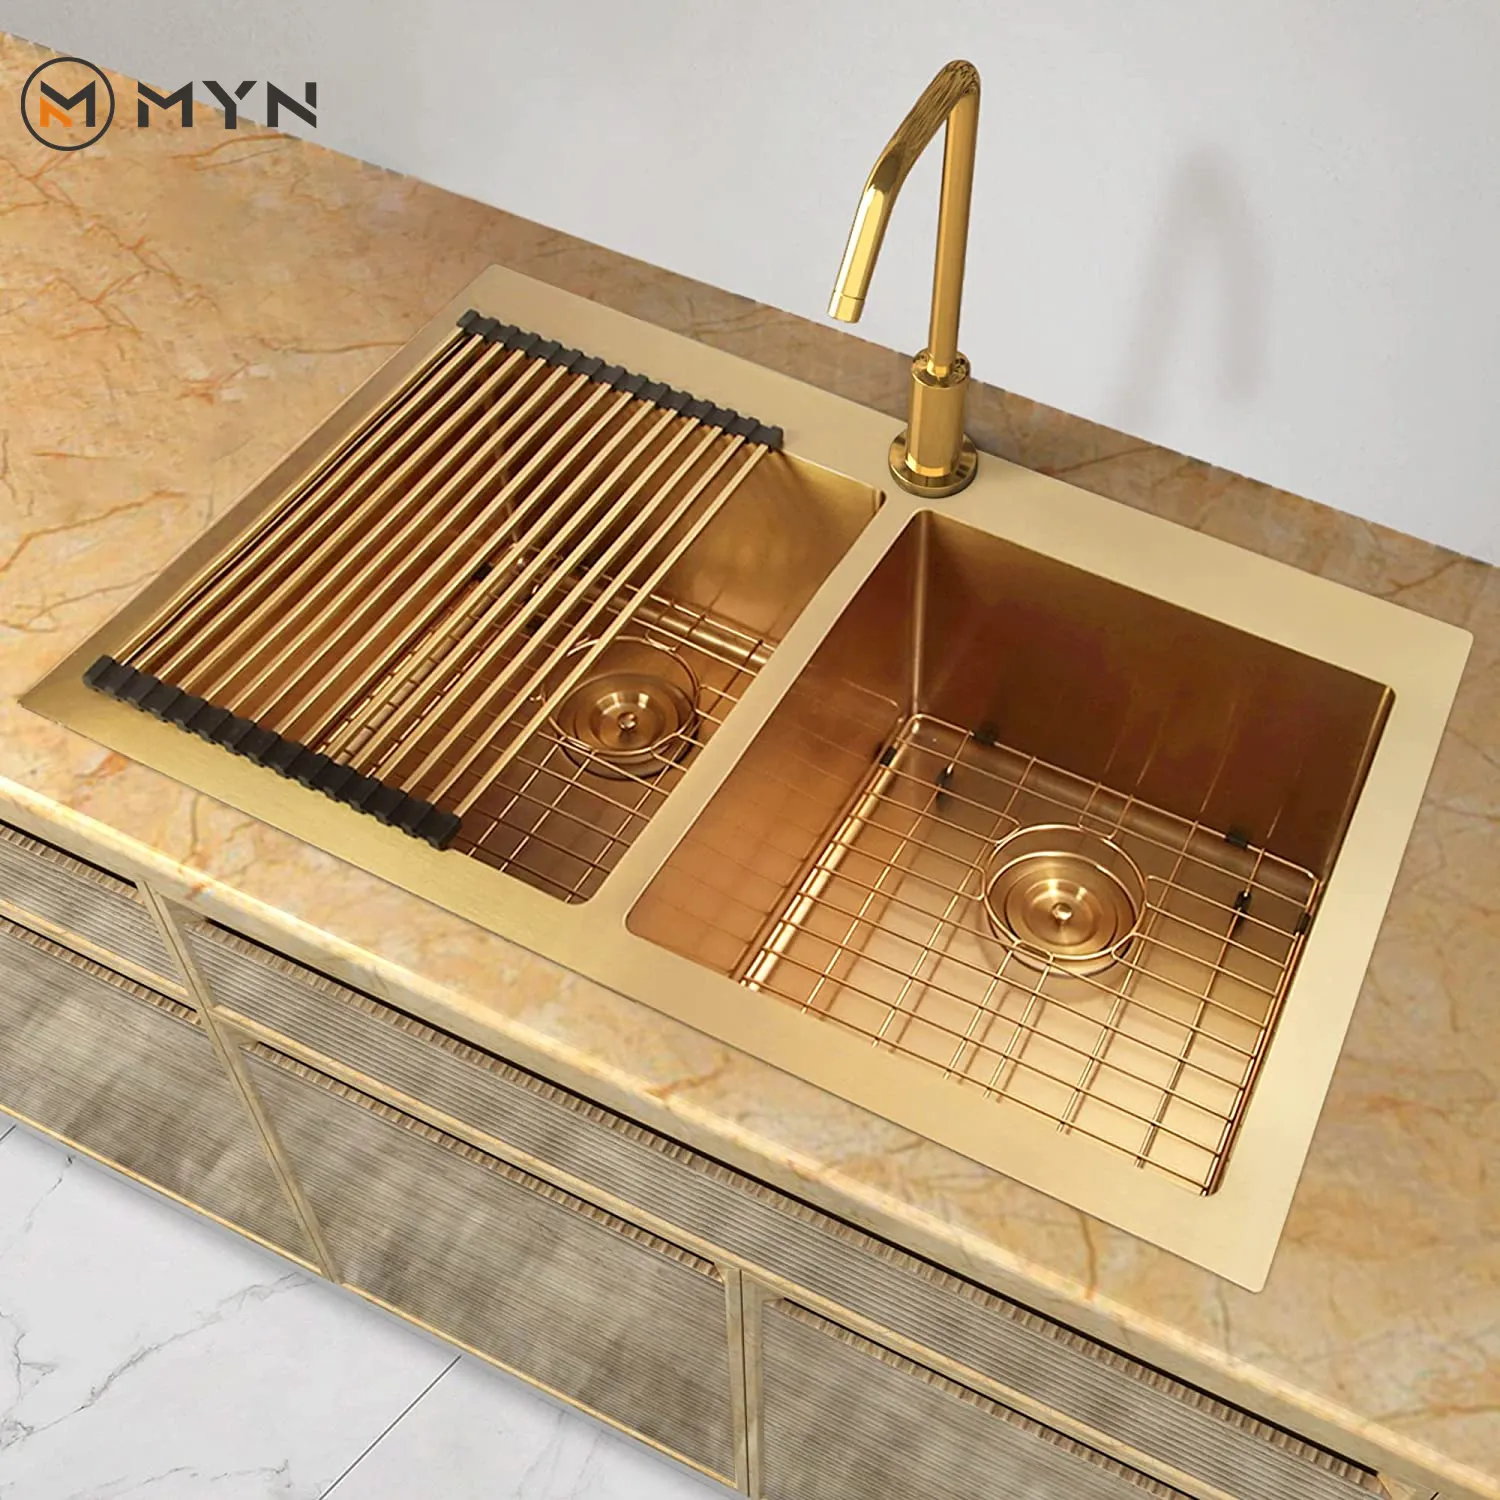 Factory New Trend 33*22 Inch Golden 304 Stainless Steel Kitchen Sink Gold Double Bowl Farmhouse Kitchen Basin